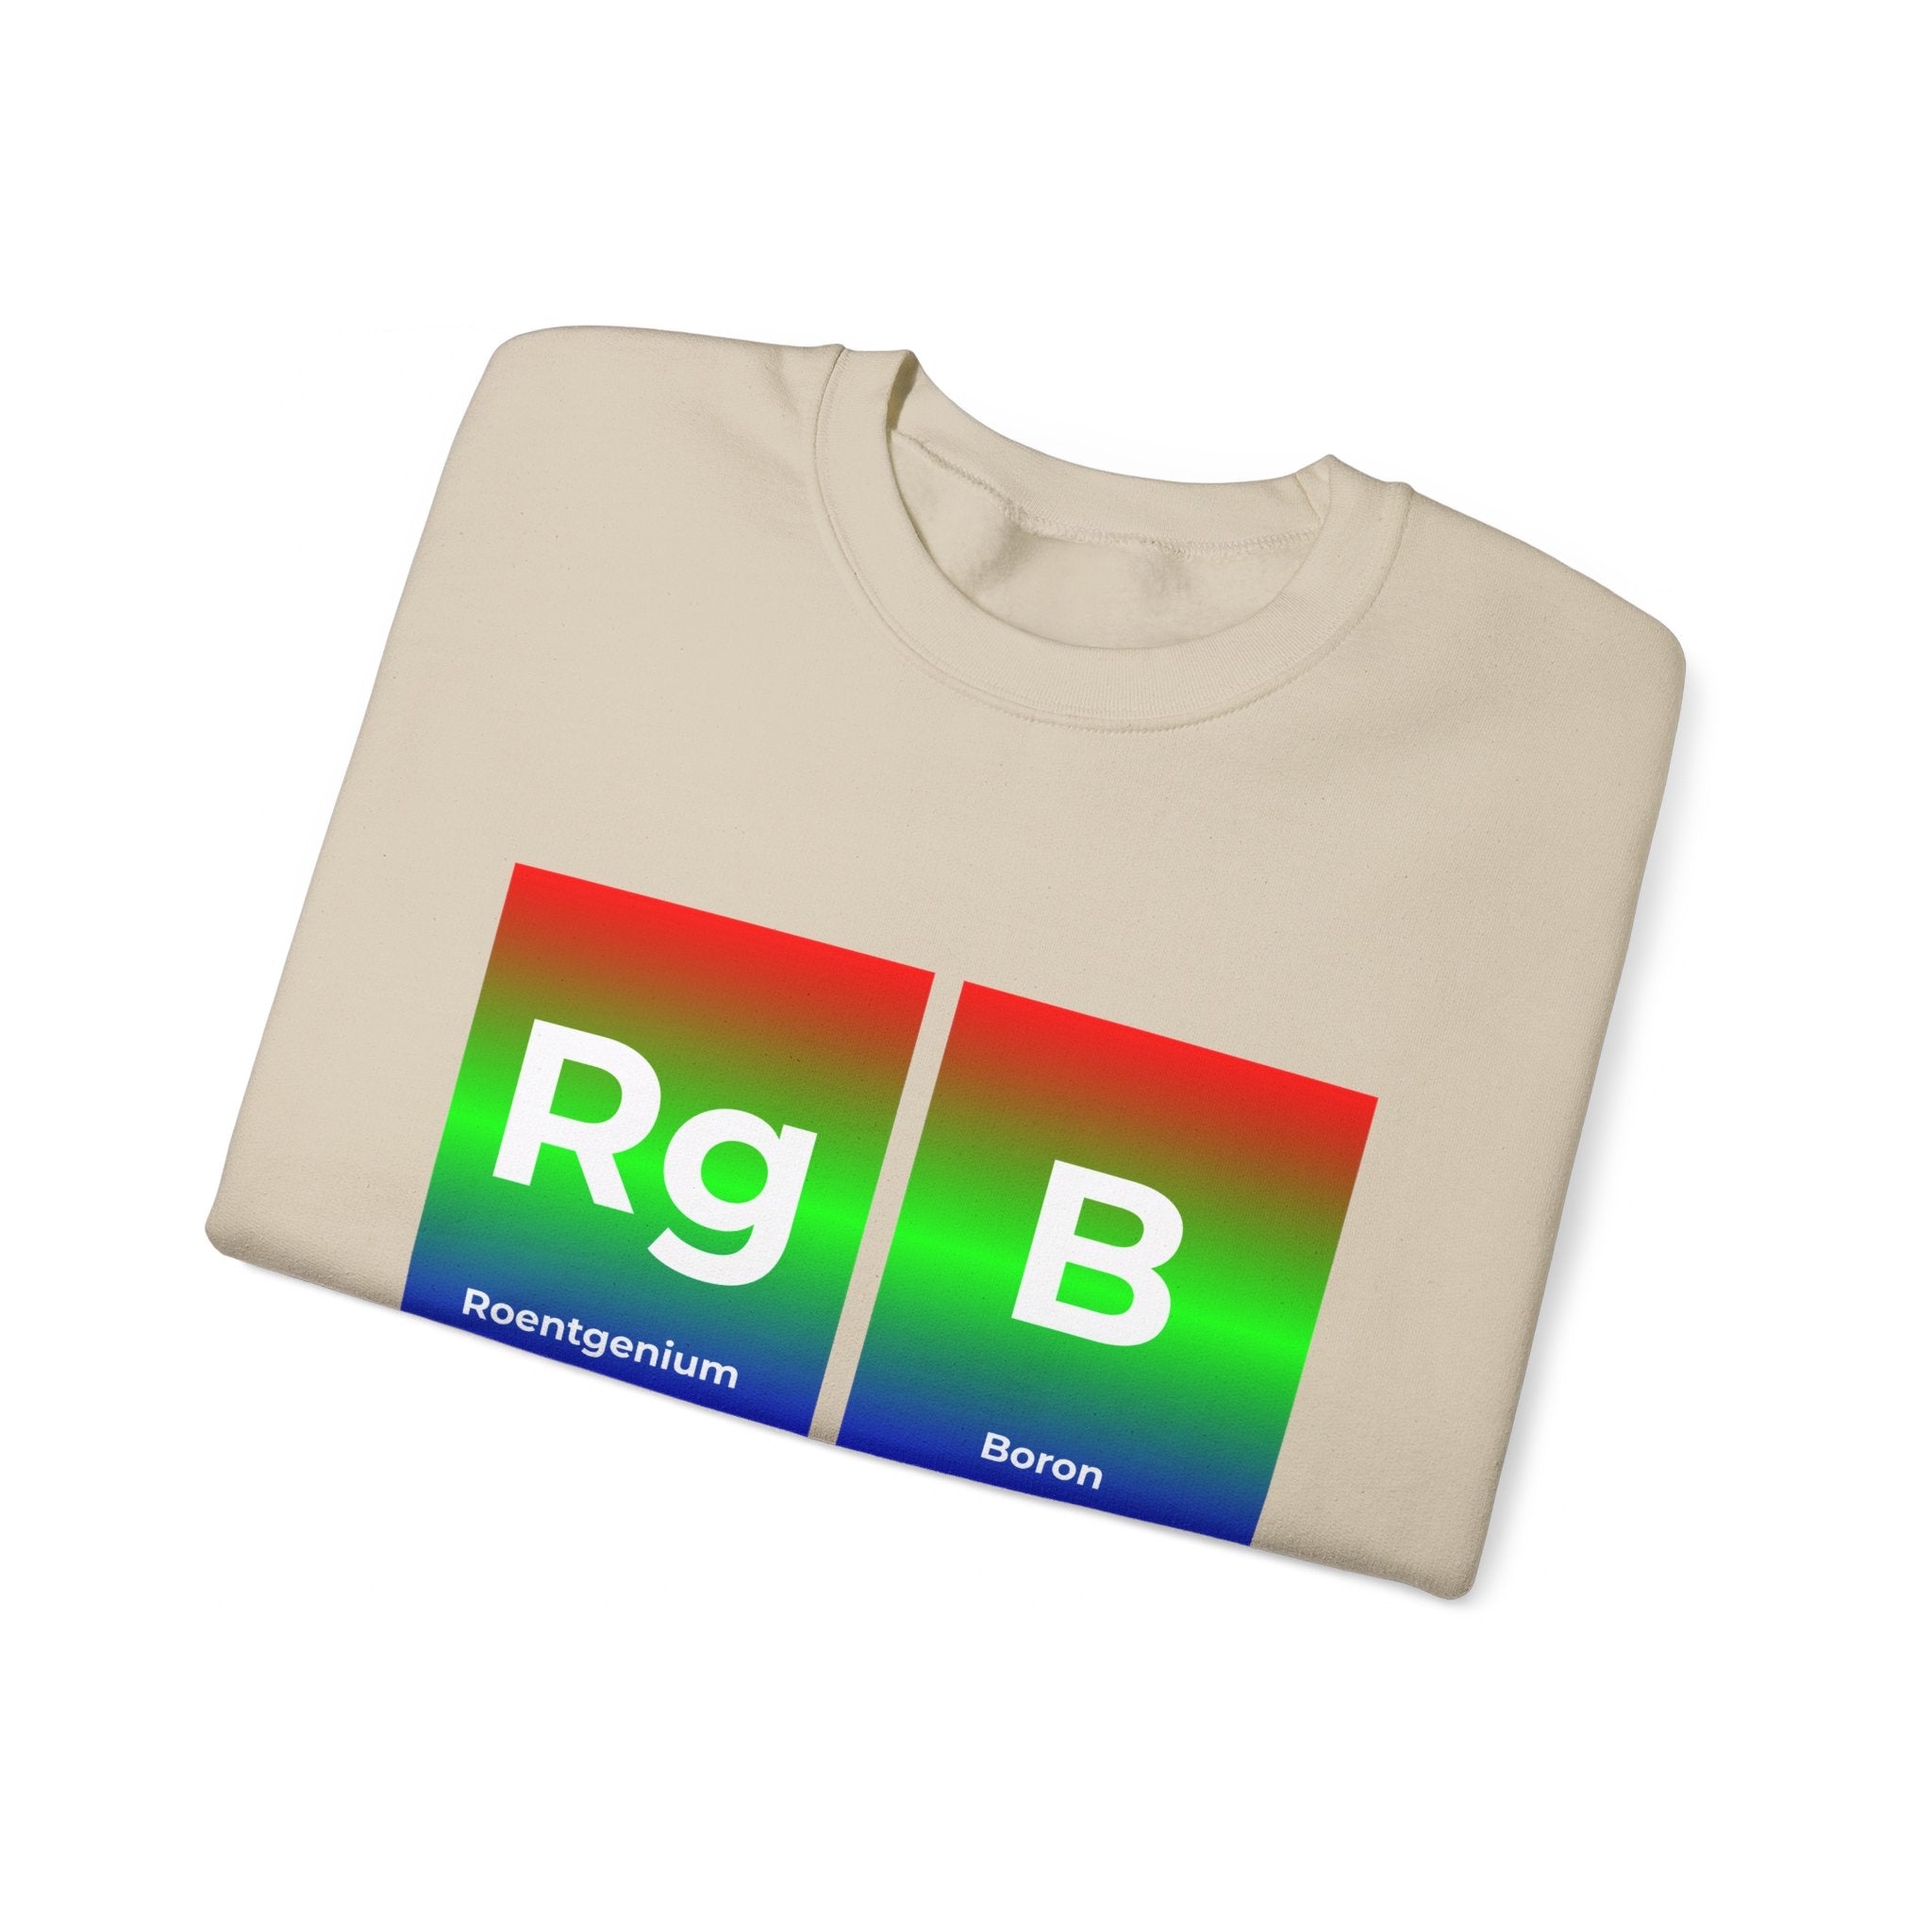 RG-B - Sweatshirt featuring a periodic table design with Roentgenium (Rg) and Boron (B) in colorful squares, perfect for comfort lovers.